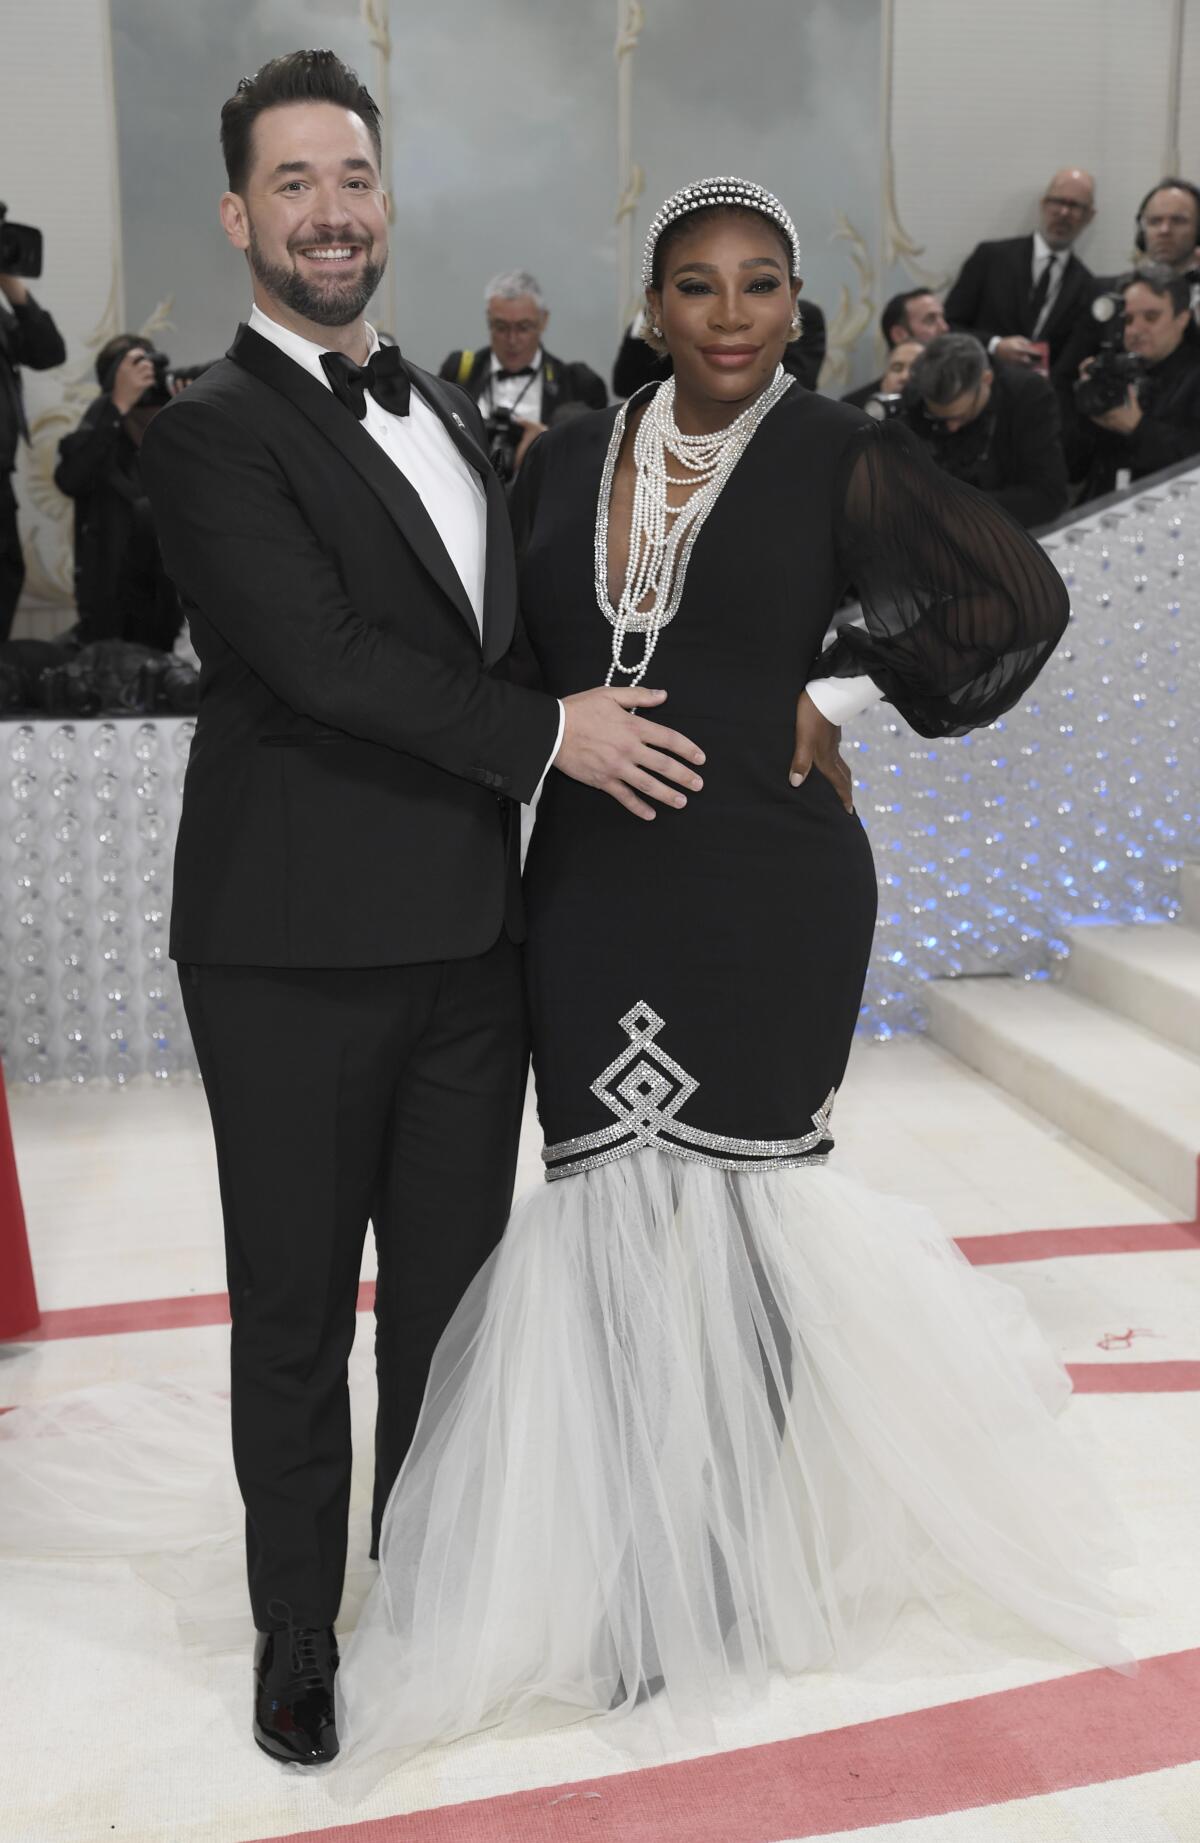 Alexis Ohanian, left, touches his wife Serena Williams' pregnant belly as they pose in formalwear